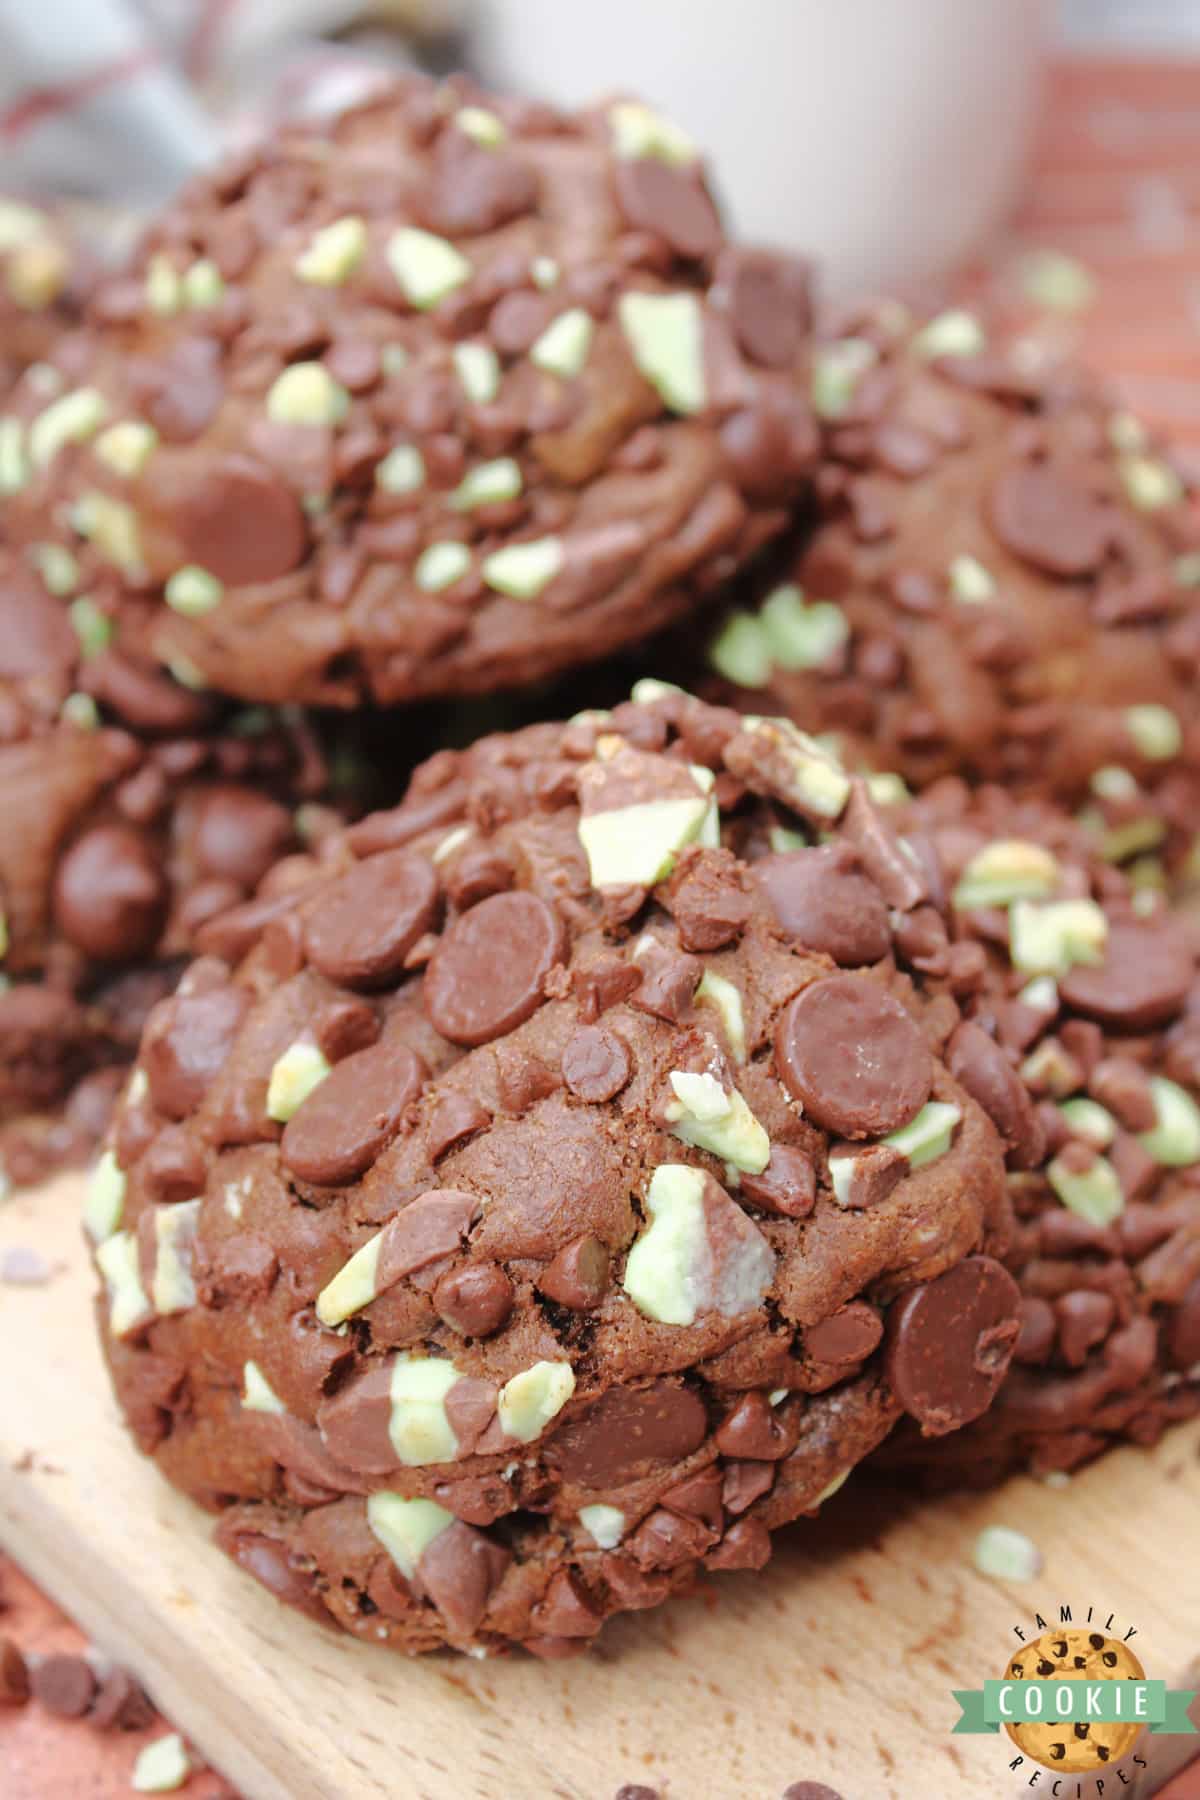 Mint Chocolate Cookies filled with chocolate ganache